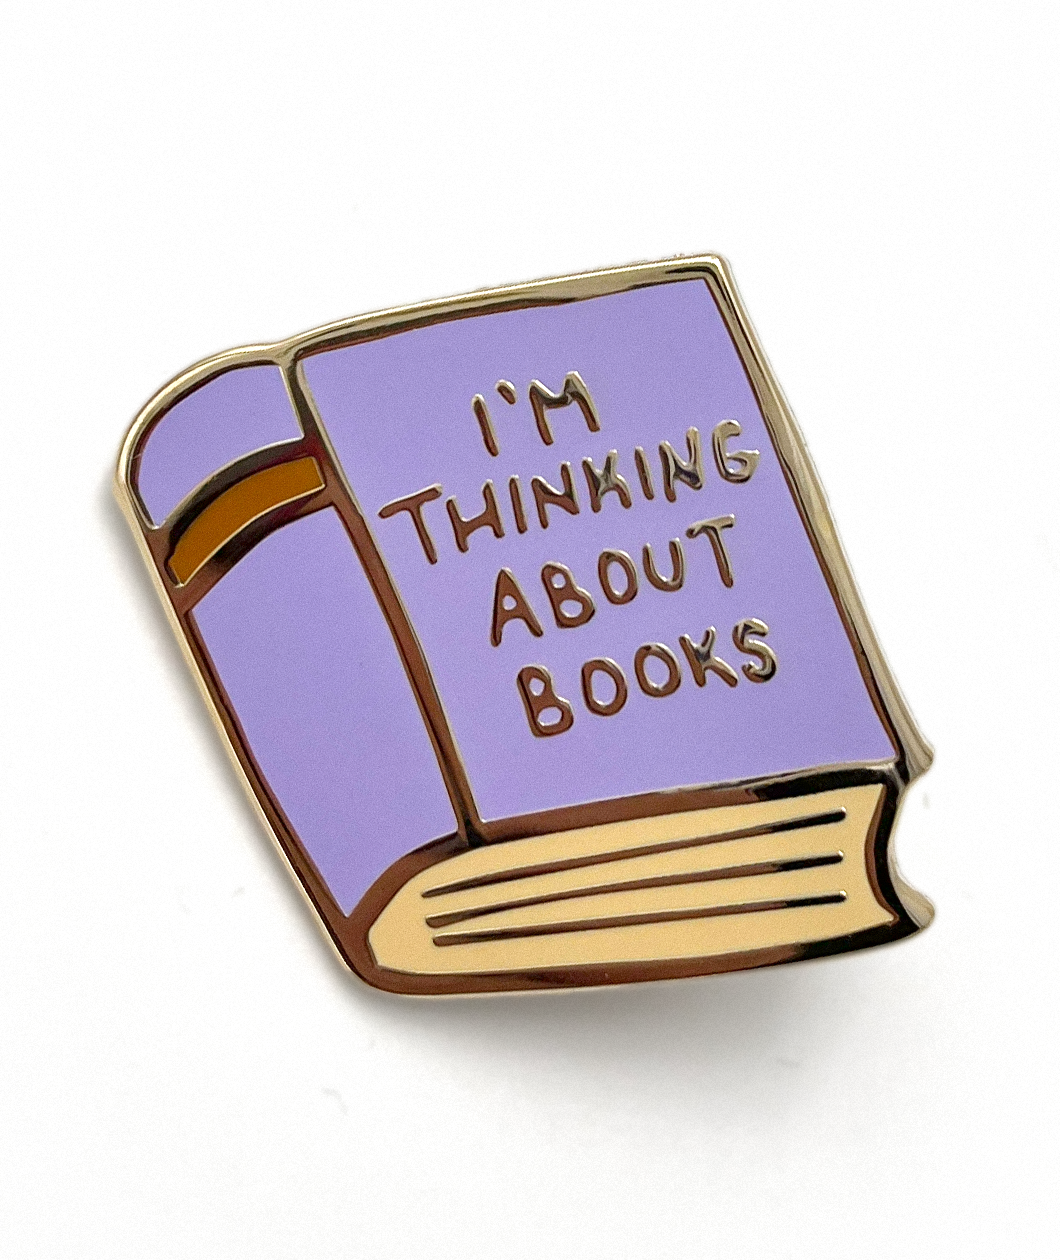 A gold and purple pin shaped like a book. The cover of the book says "I'm thinking about books". From Ariel Bissett.